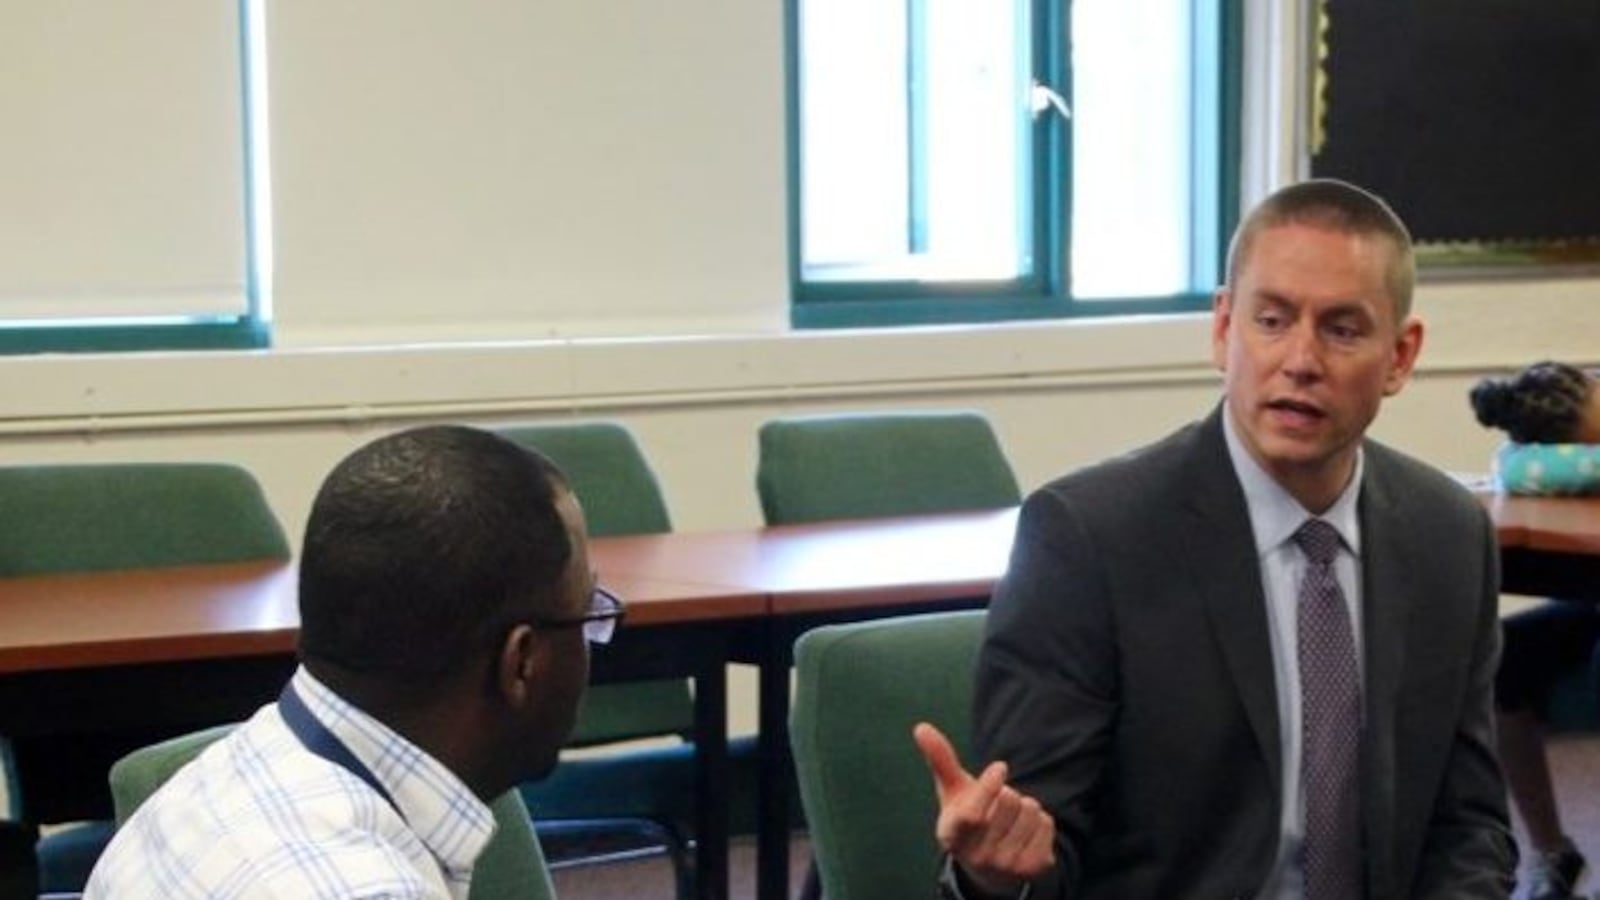 Stephen Osborn (right), a finalist for superintendent of Tennessee's Achievement Schools District, speaks with Mendell Grinter, leader of the Campaign for School Equity, during a meeting at Martin Luther King College Preparatory School in Memphis.